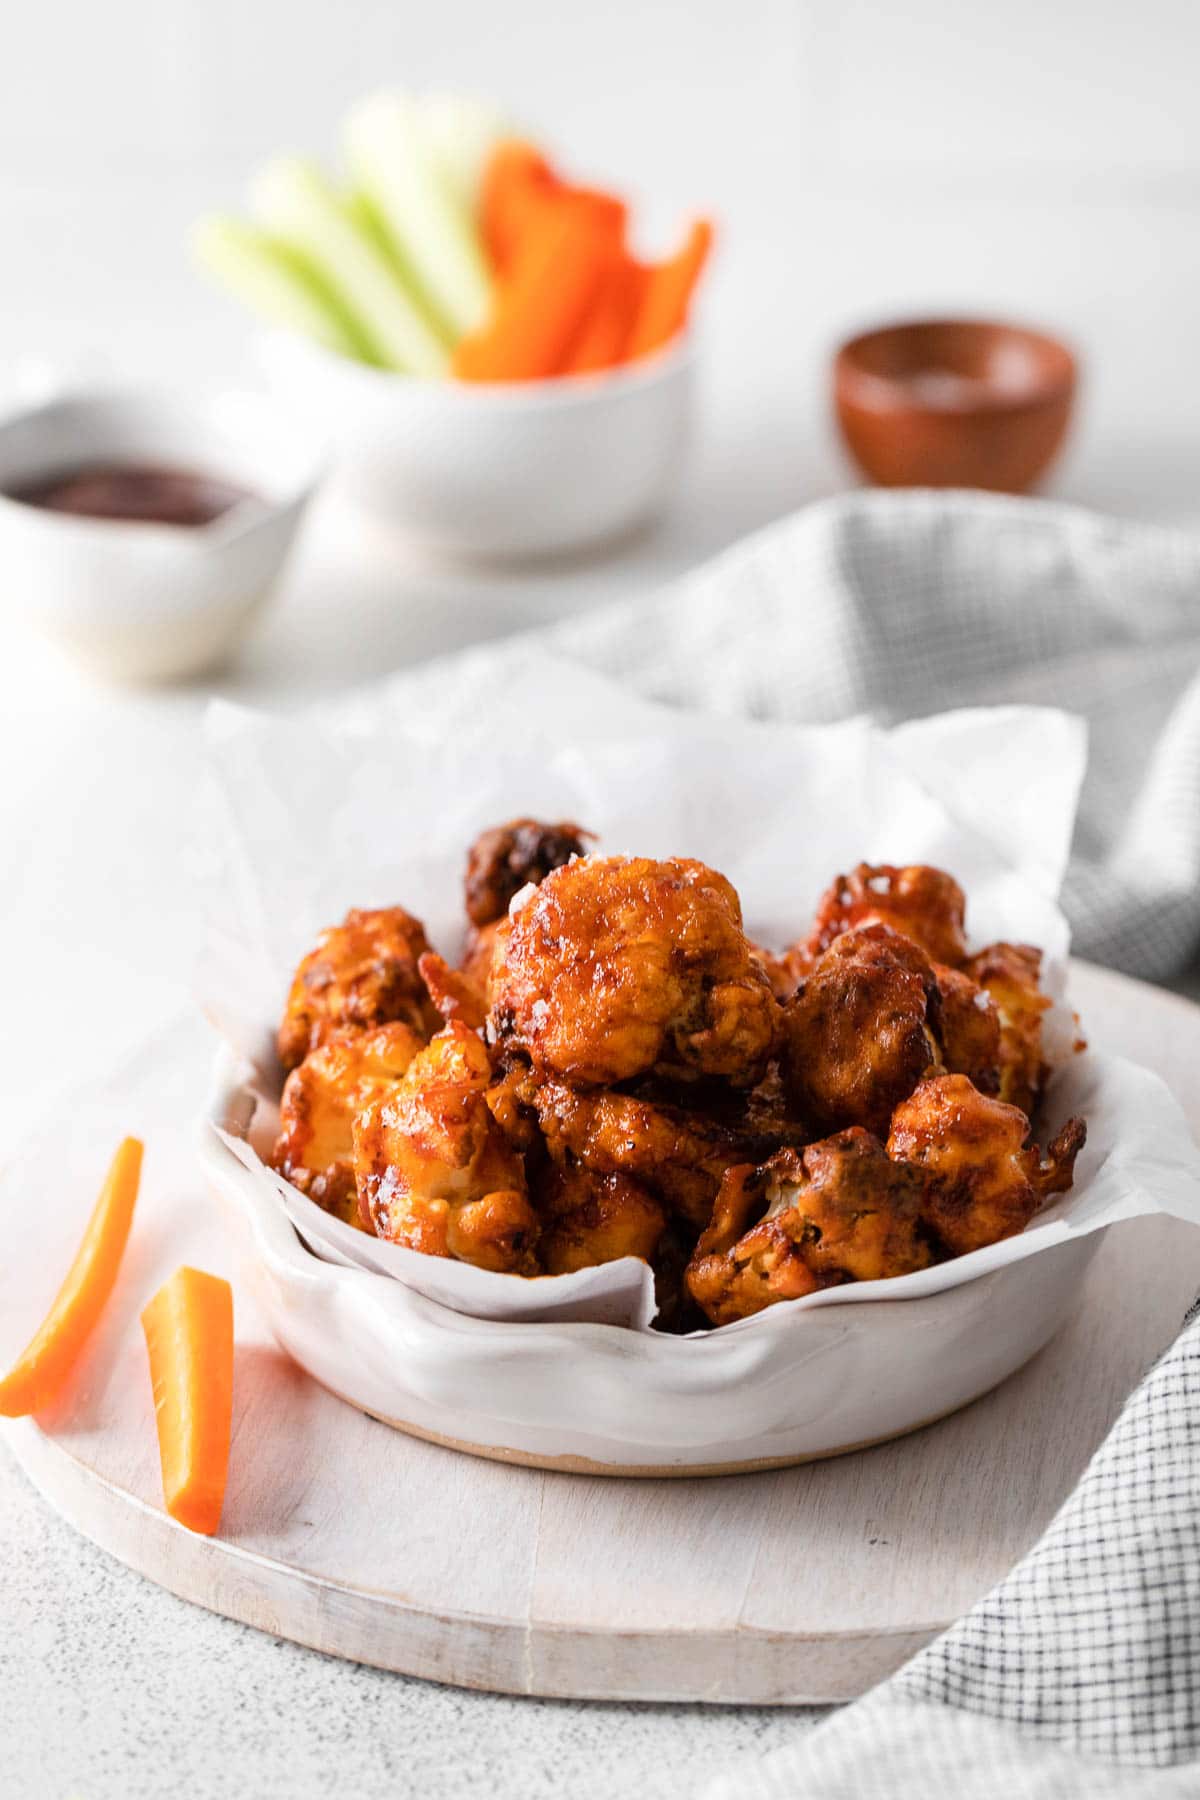 A wooden board with a bowl of cauliflower wings and some carrots